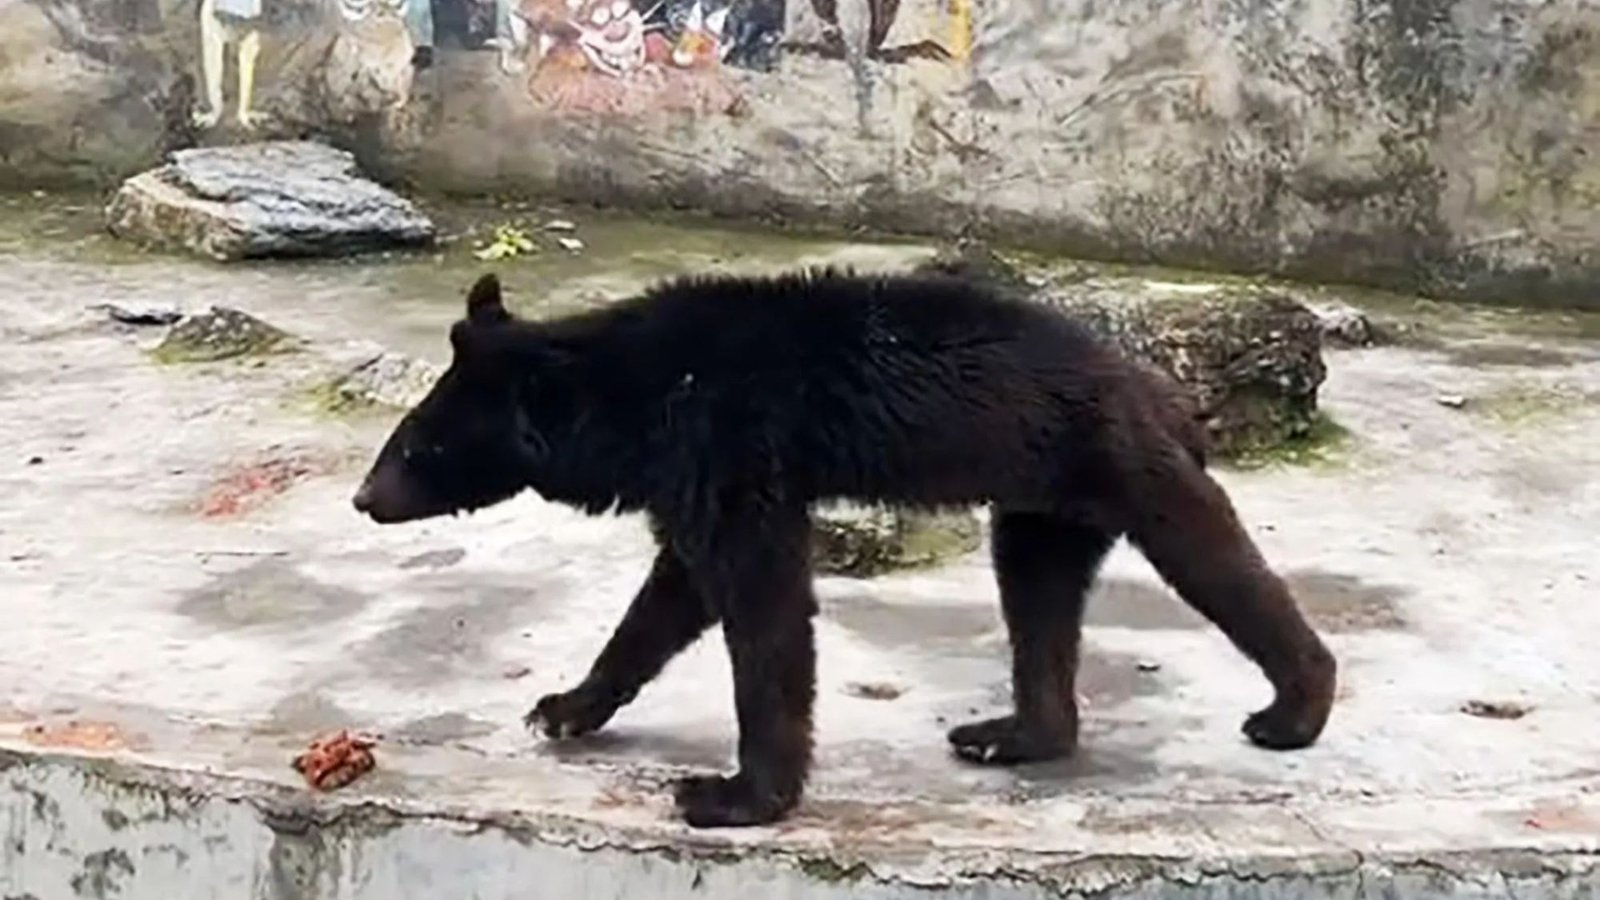 Tragic vid shows worlds saddest bear look emaciated after living on bread veg at skint zoo that cant afford meat